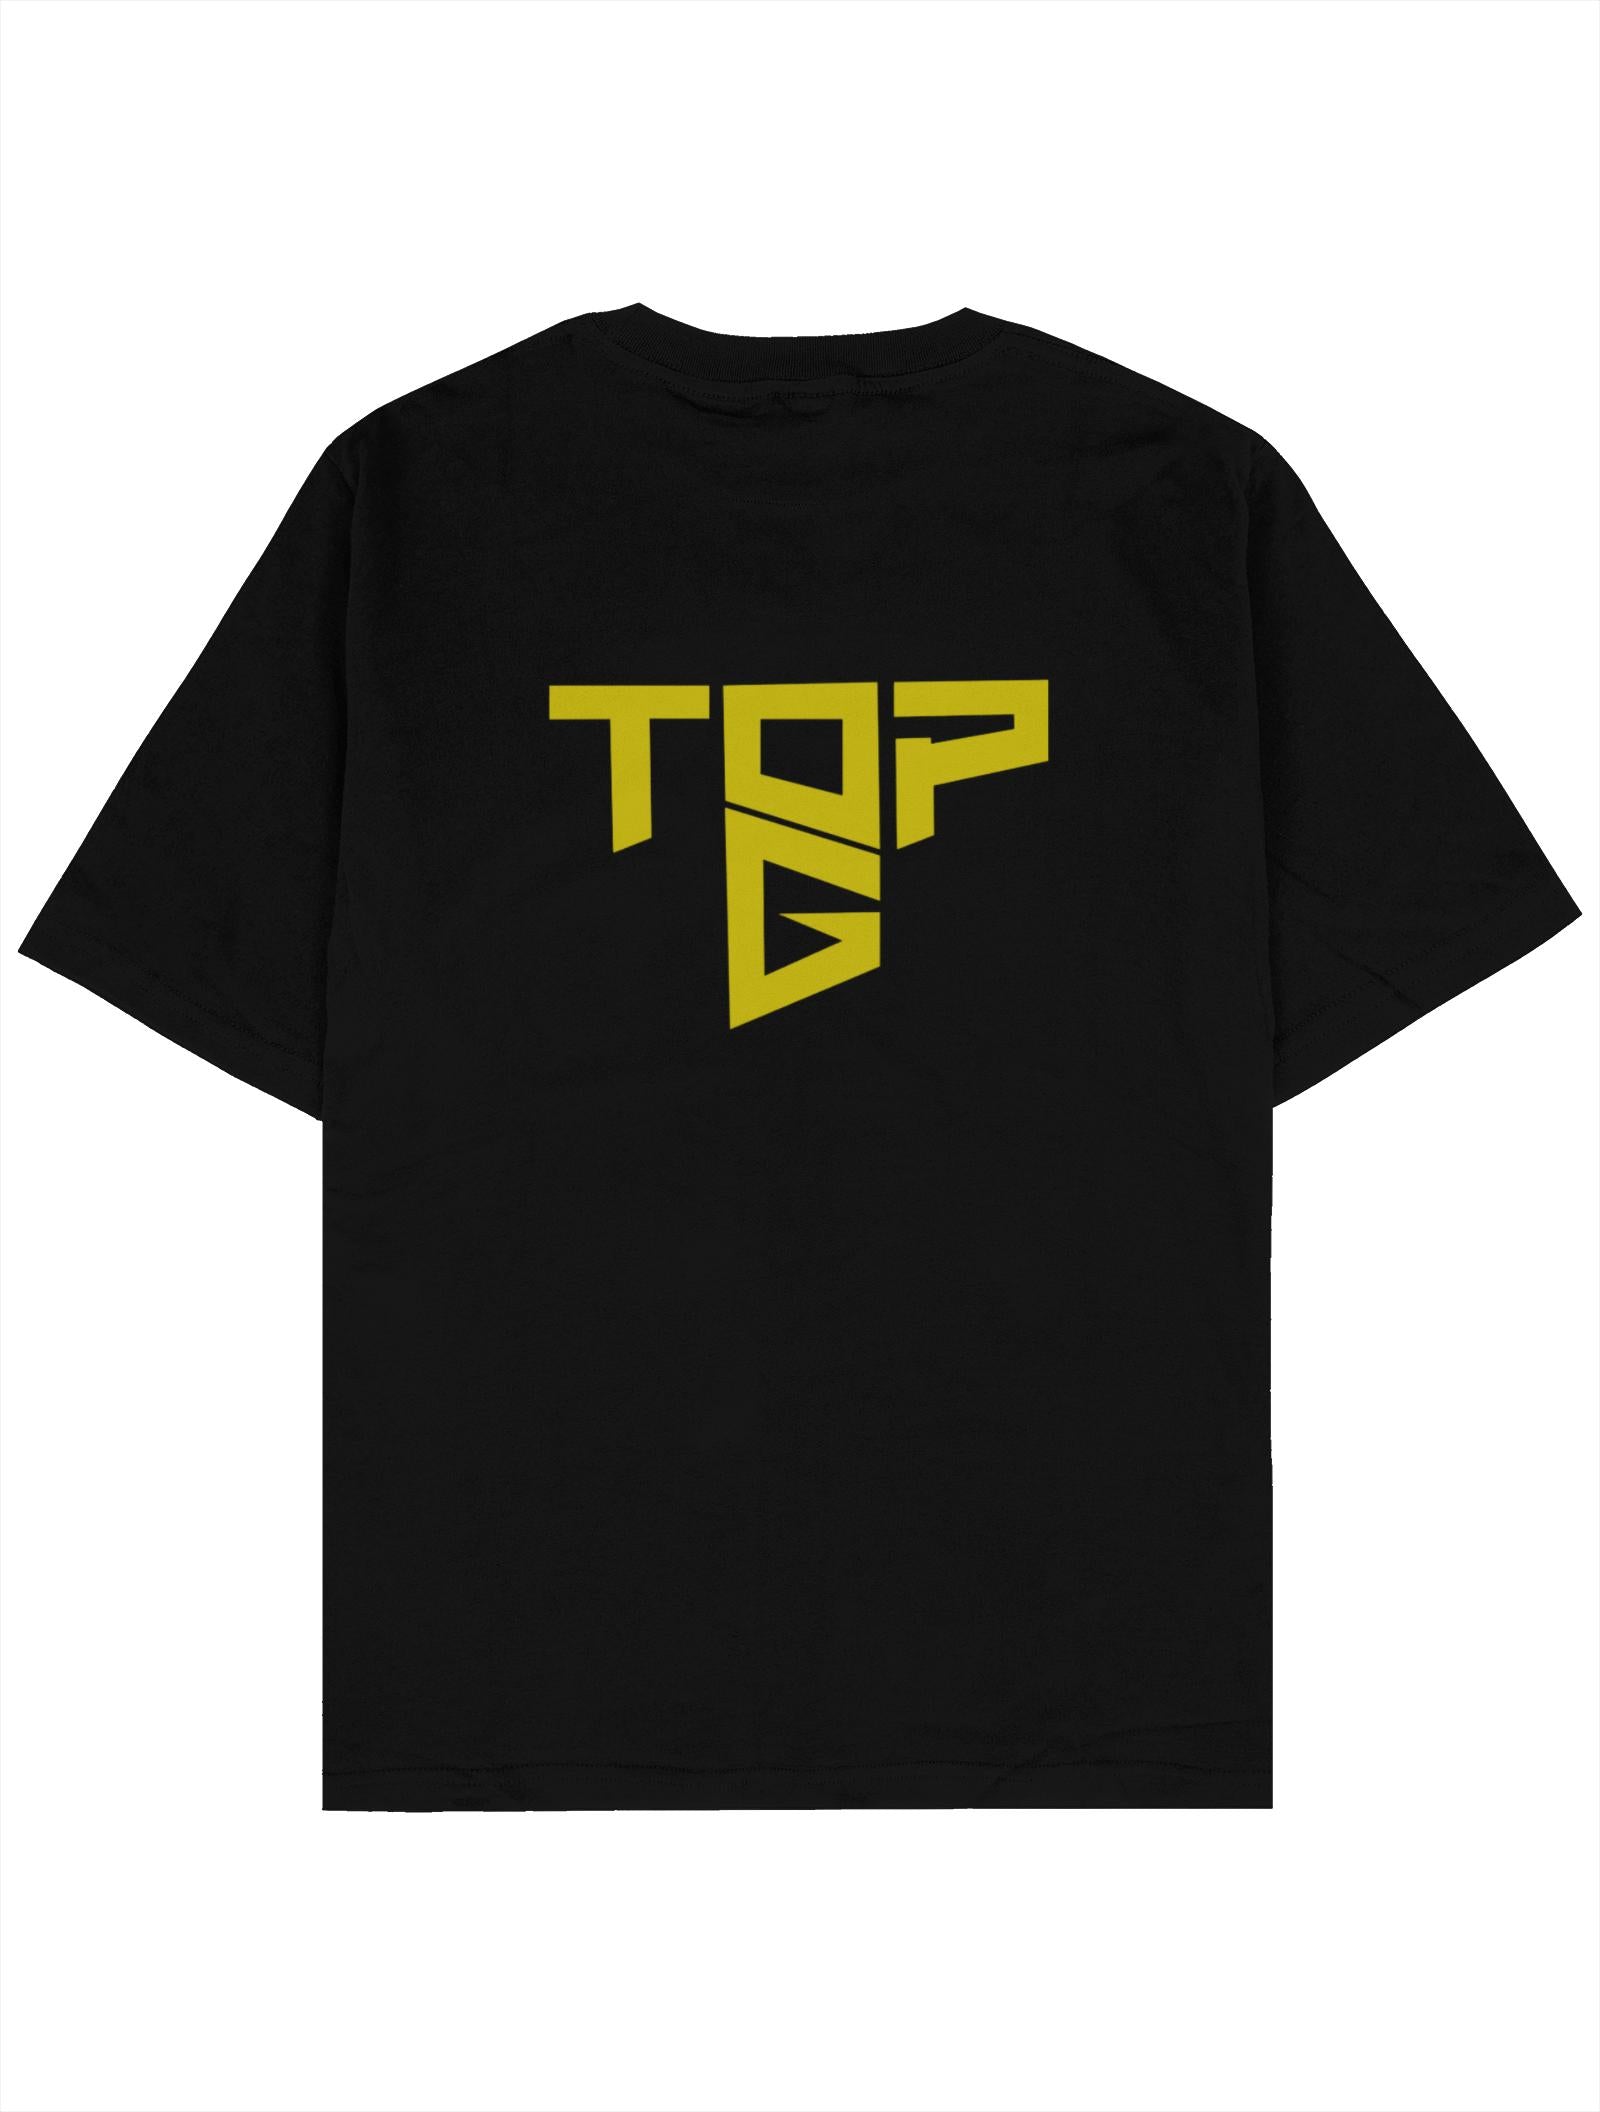 Special Top G T-Shirt